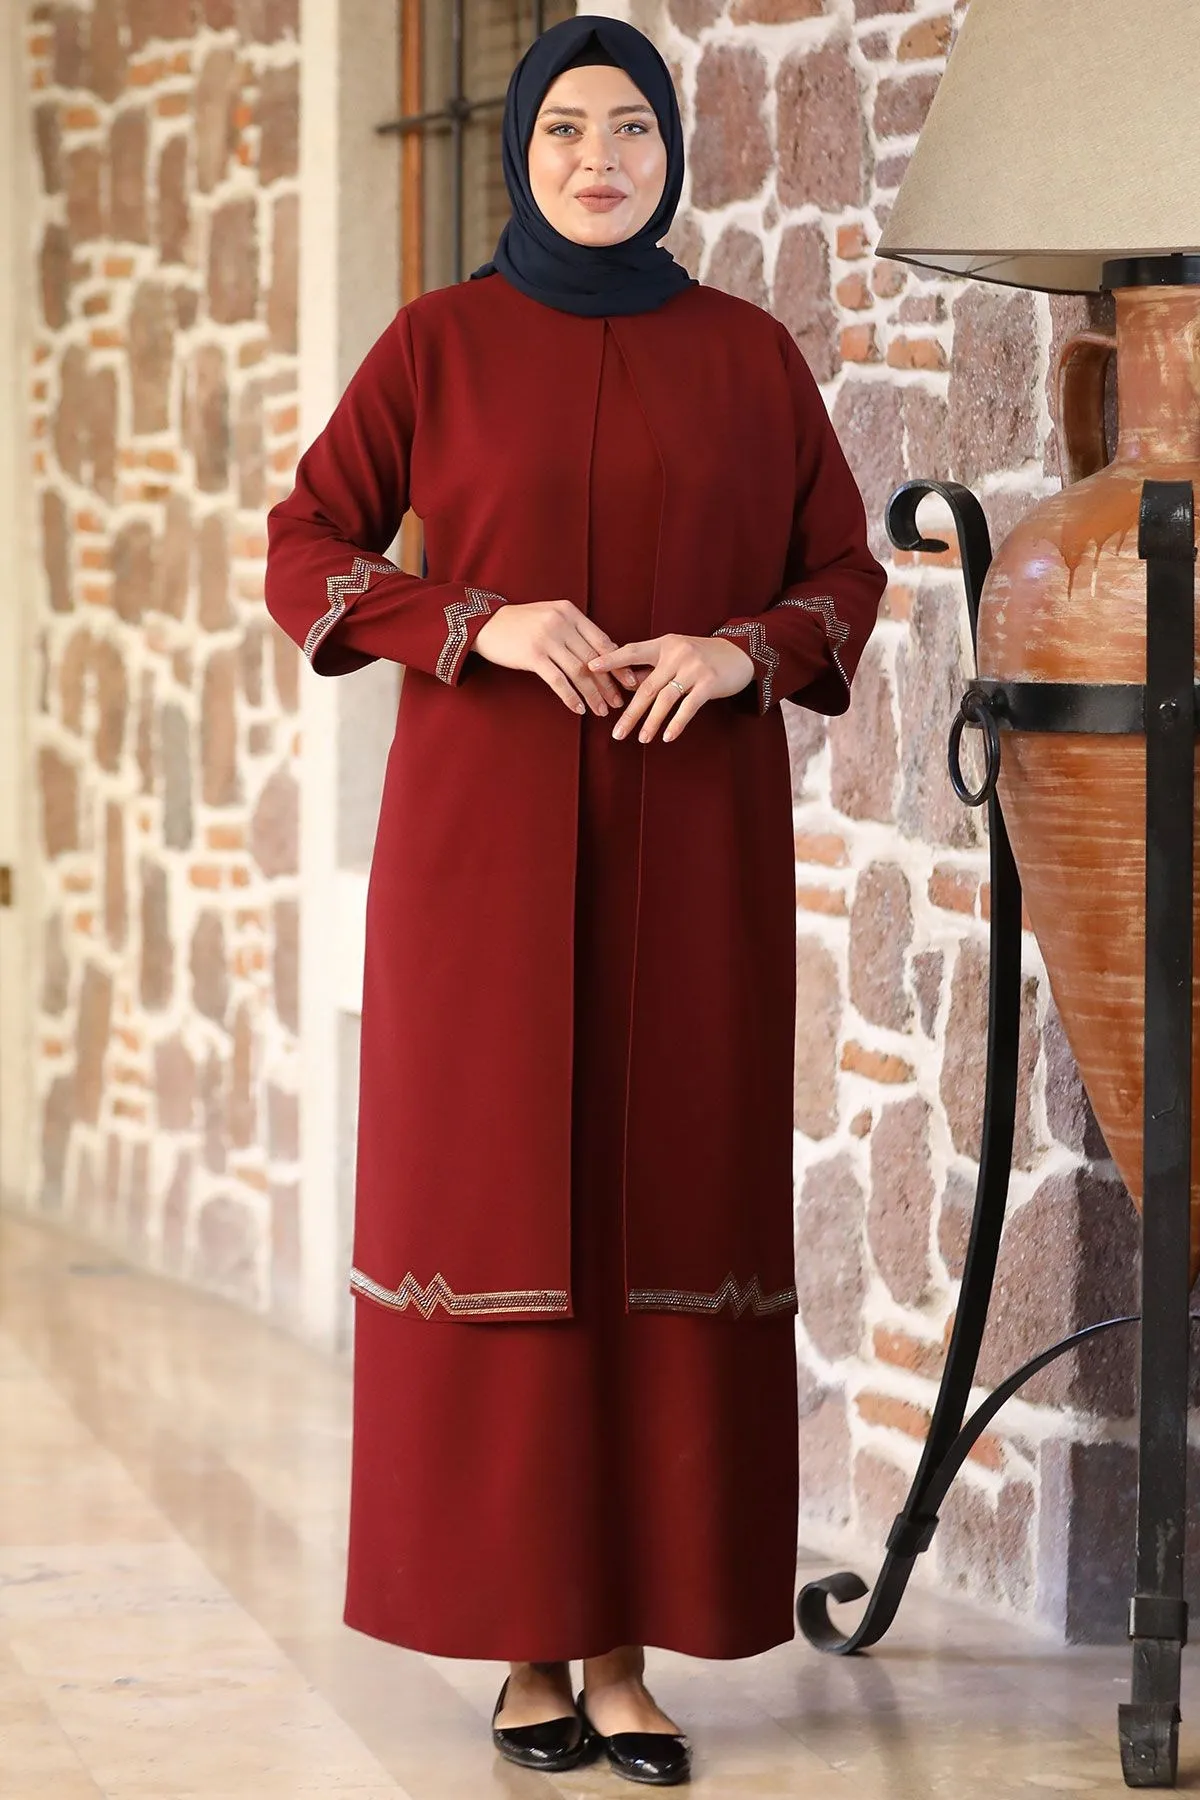 Muslim women clothes Big size Evening Dress Long Sleeve Muslim Women Prom Party Ceremon Gown women's dress Women Party Dresses